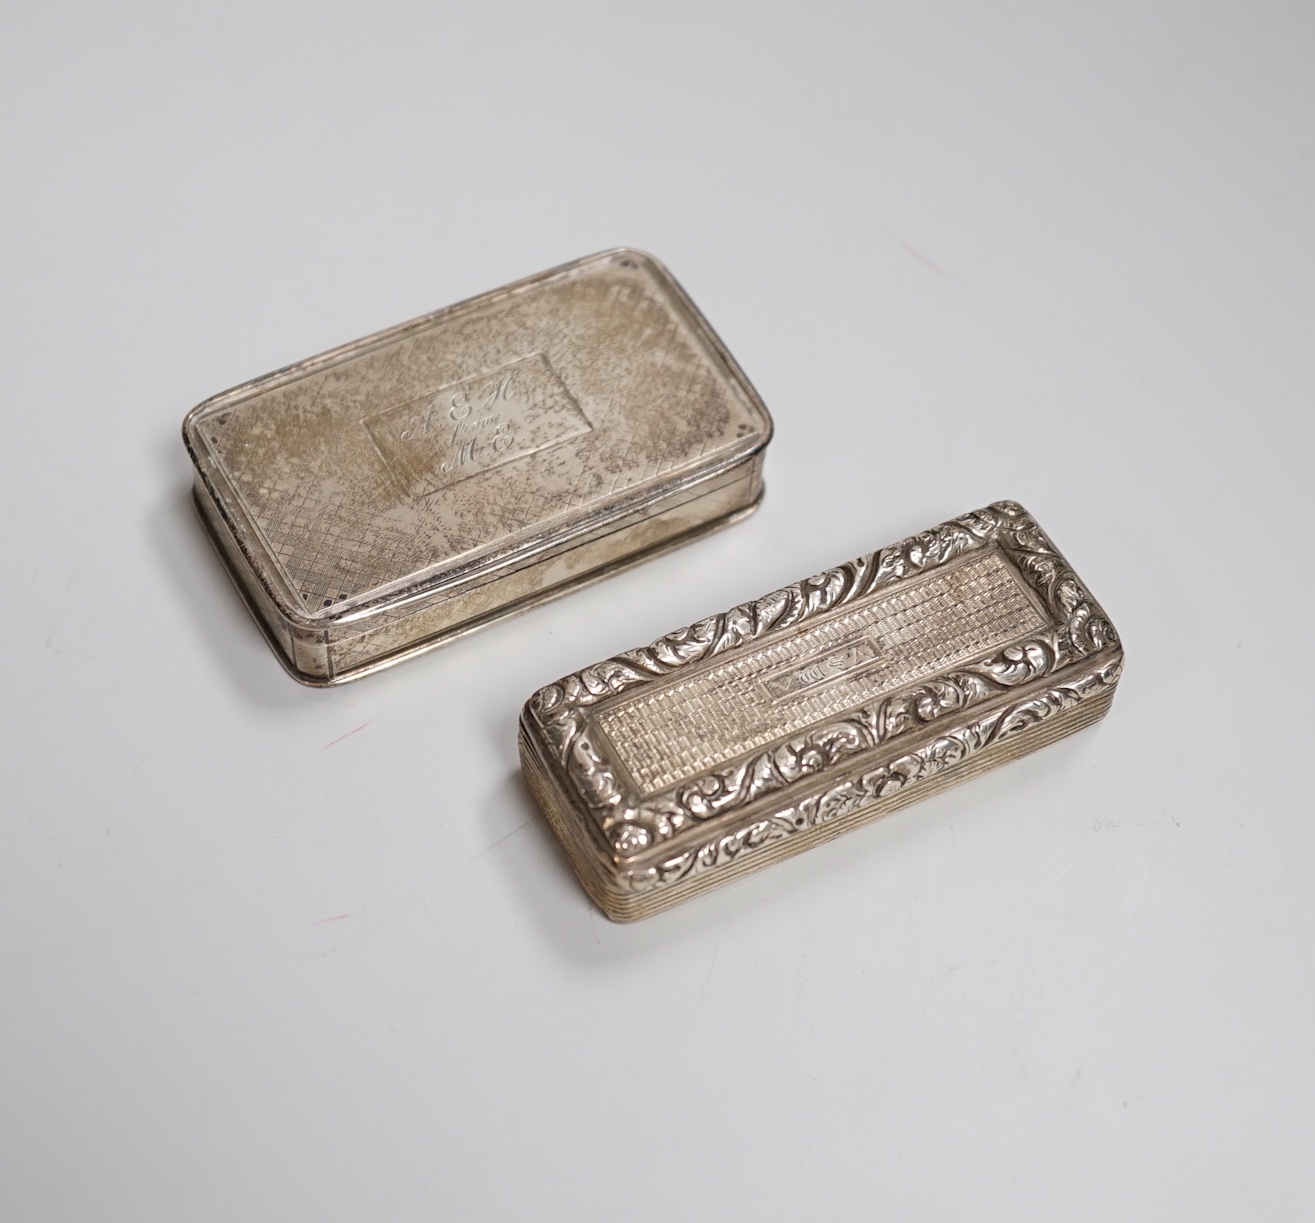 A George IV engine turned silver snuff box, with foliate scroll thumbpiece and banding, maker ES, Birmingham 1825, 6.75cm, 68 grams and a Nathaniel Mills engine turned snuff box, Birmingham 1827, 6.75cm, 60 grams        